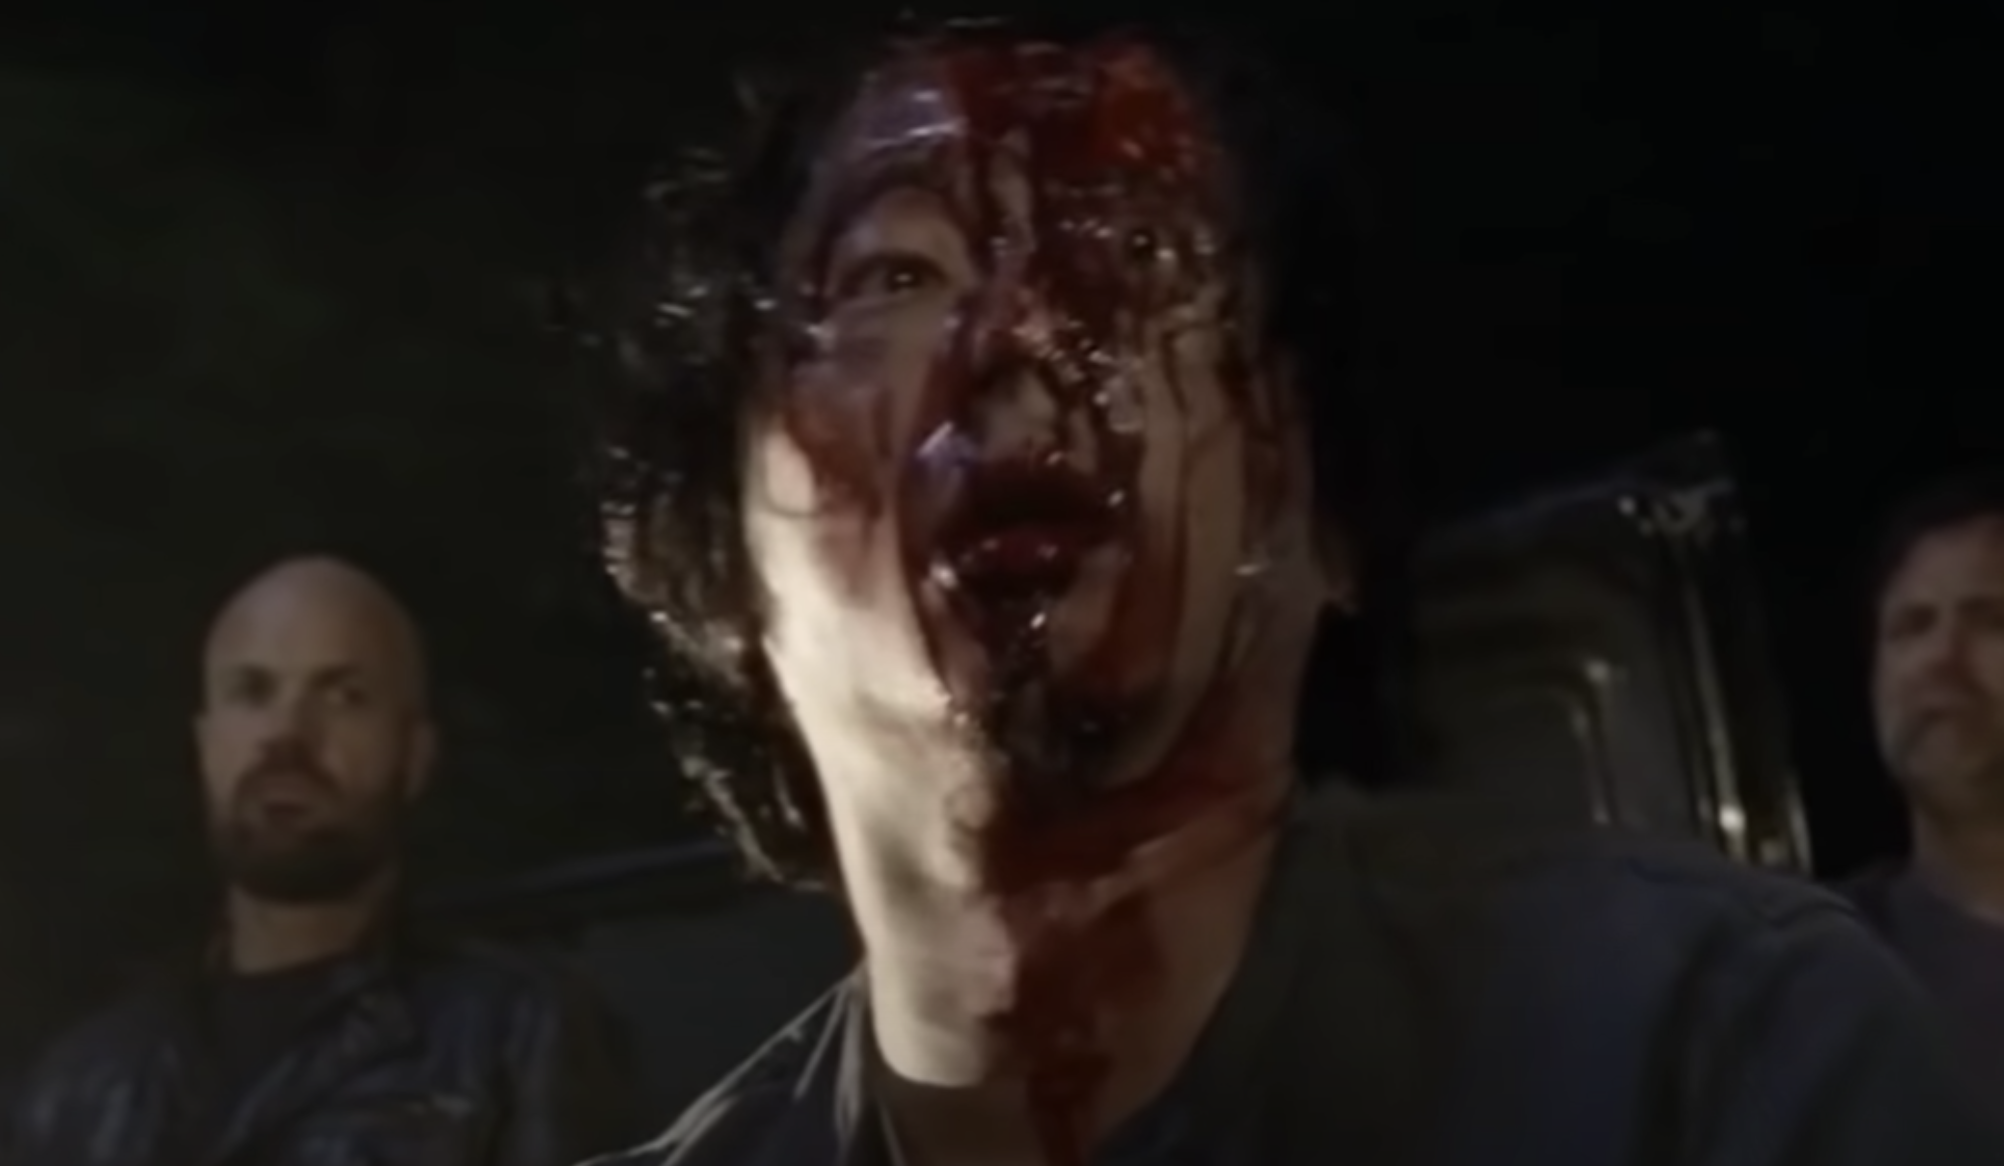 A man&#x27;s eye bulges out of his head and his face is covered in blood